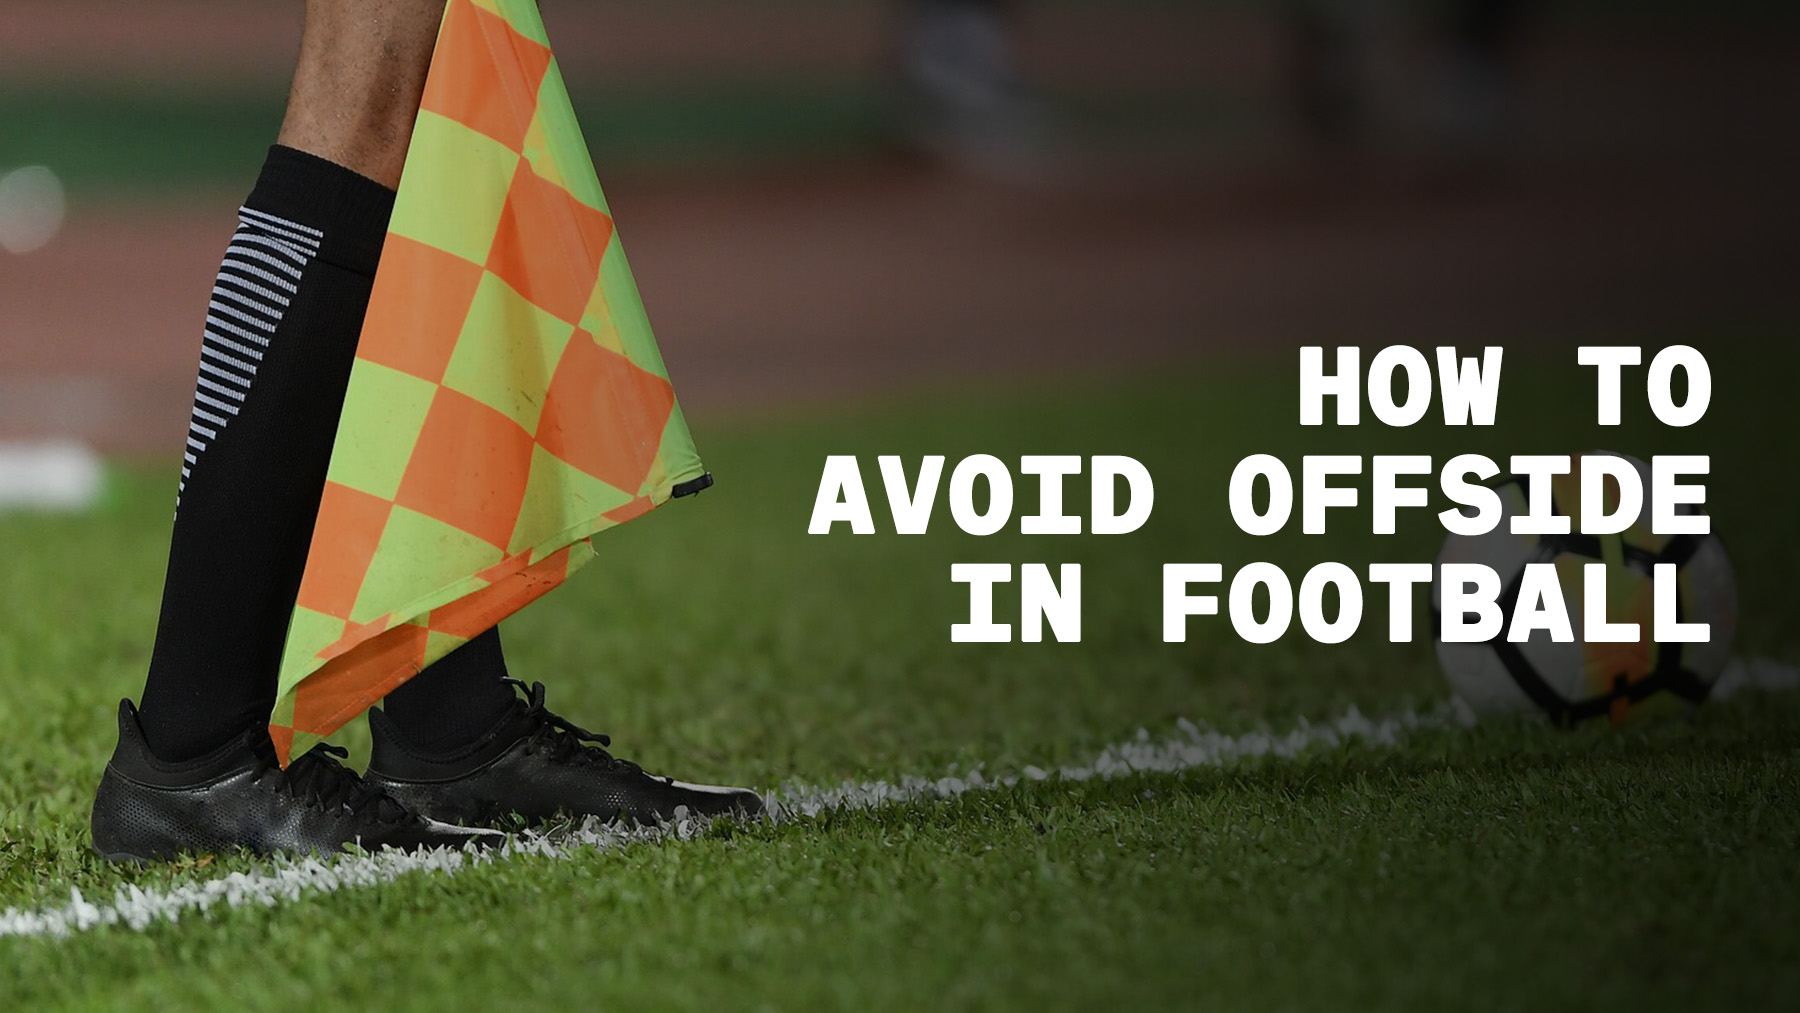 A comprehensive guide to avoid being in offside positions when playing football.